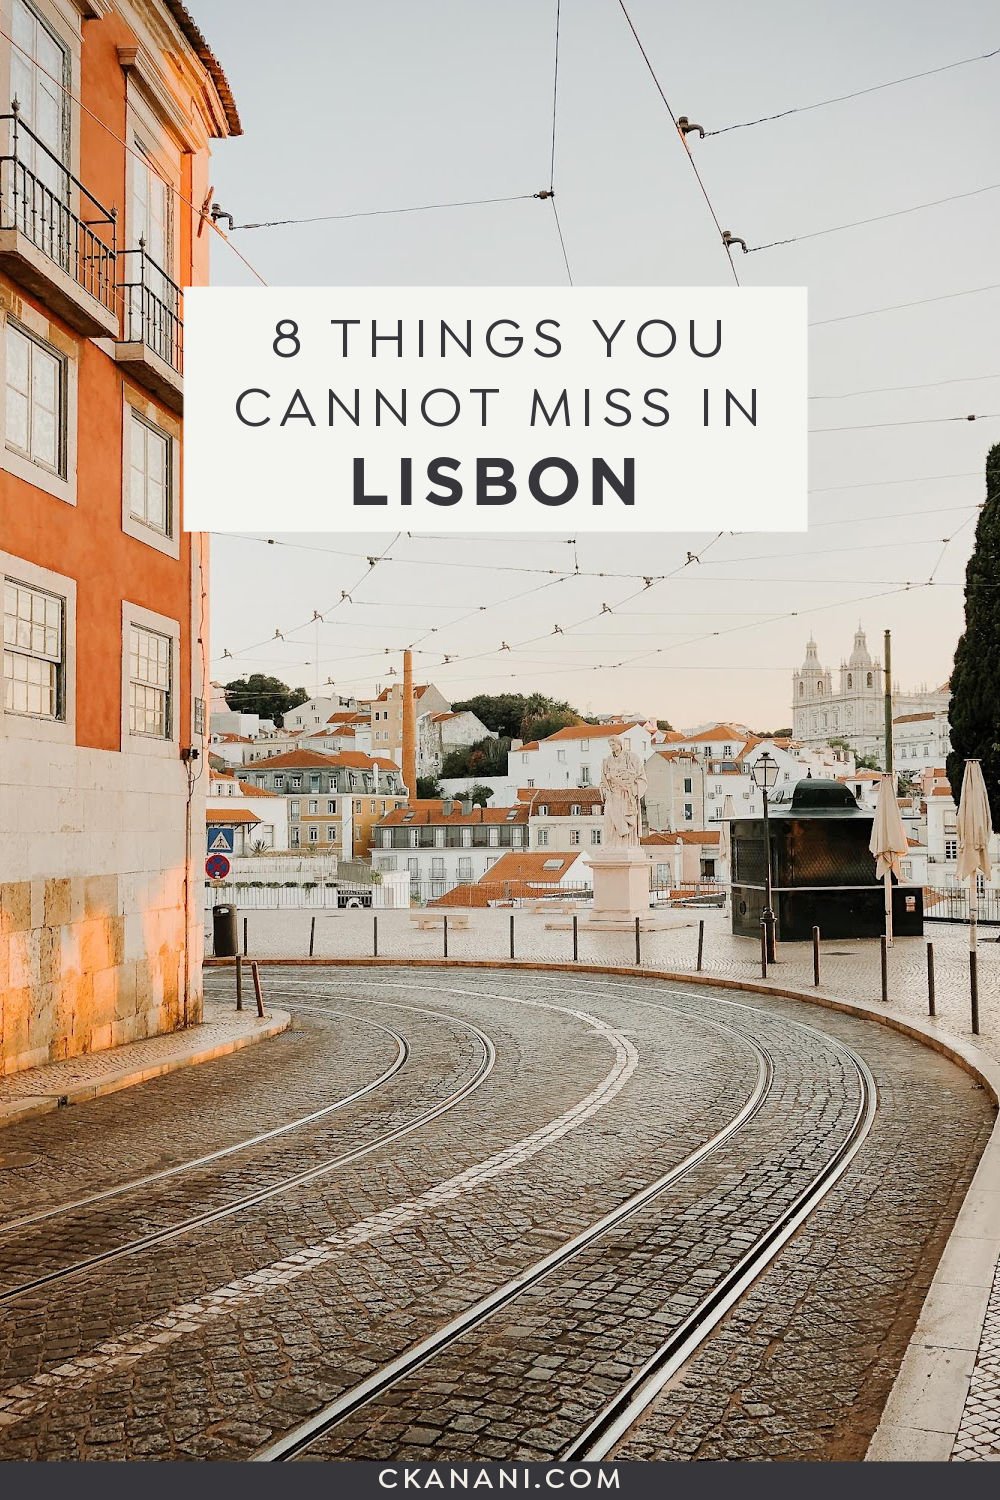 Lisbon itinerary things to see, do, eat, and drink! #travel #traveltips #europe #europetraveltips #lisbon #portugal Lisbon tips / things to do in Lisbon